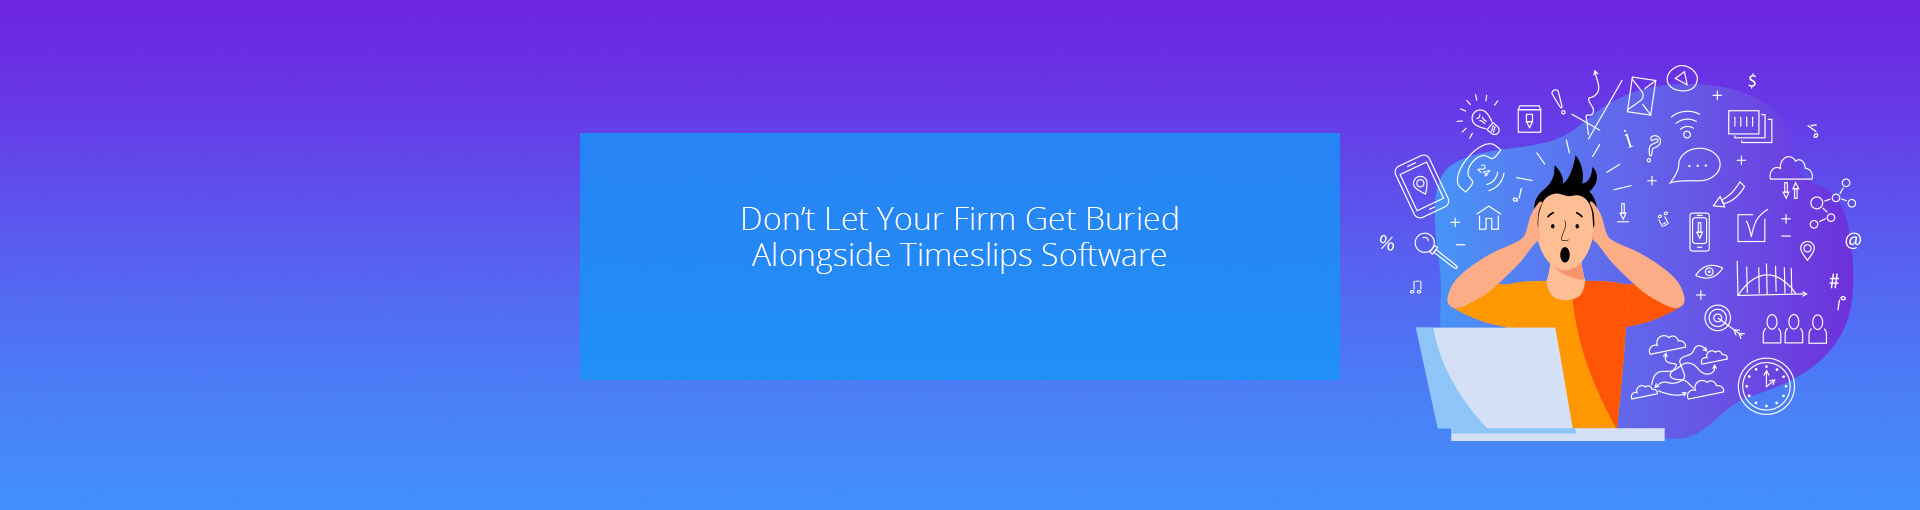 Don’t Let Your Firm Get Buried Alongside TimeSlips Software Featured Image